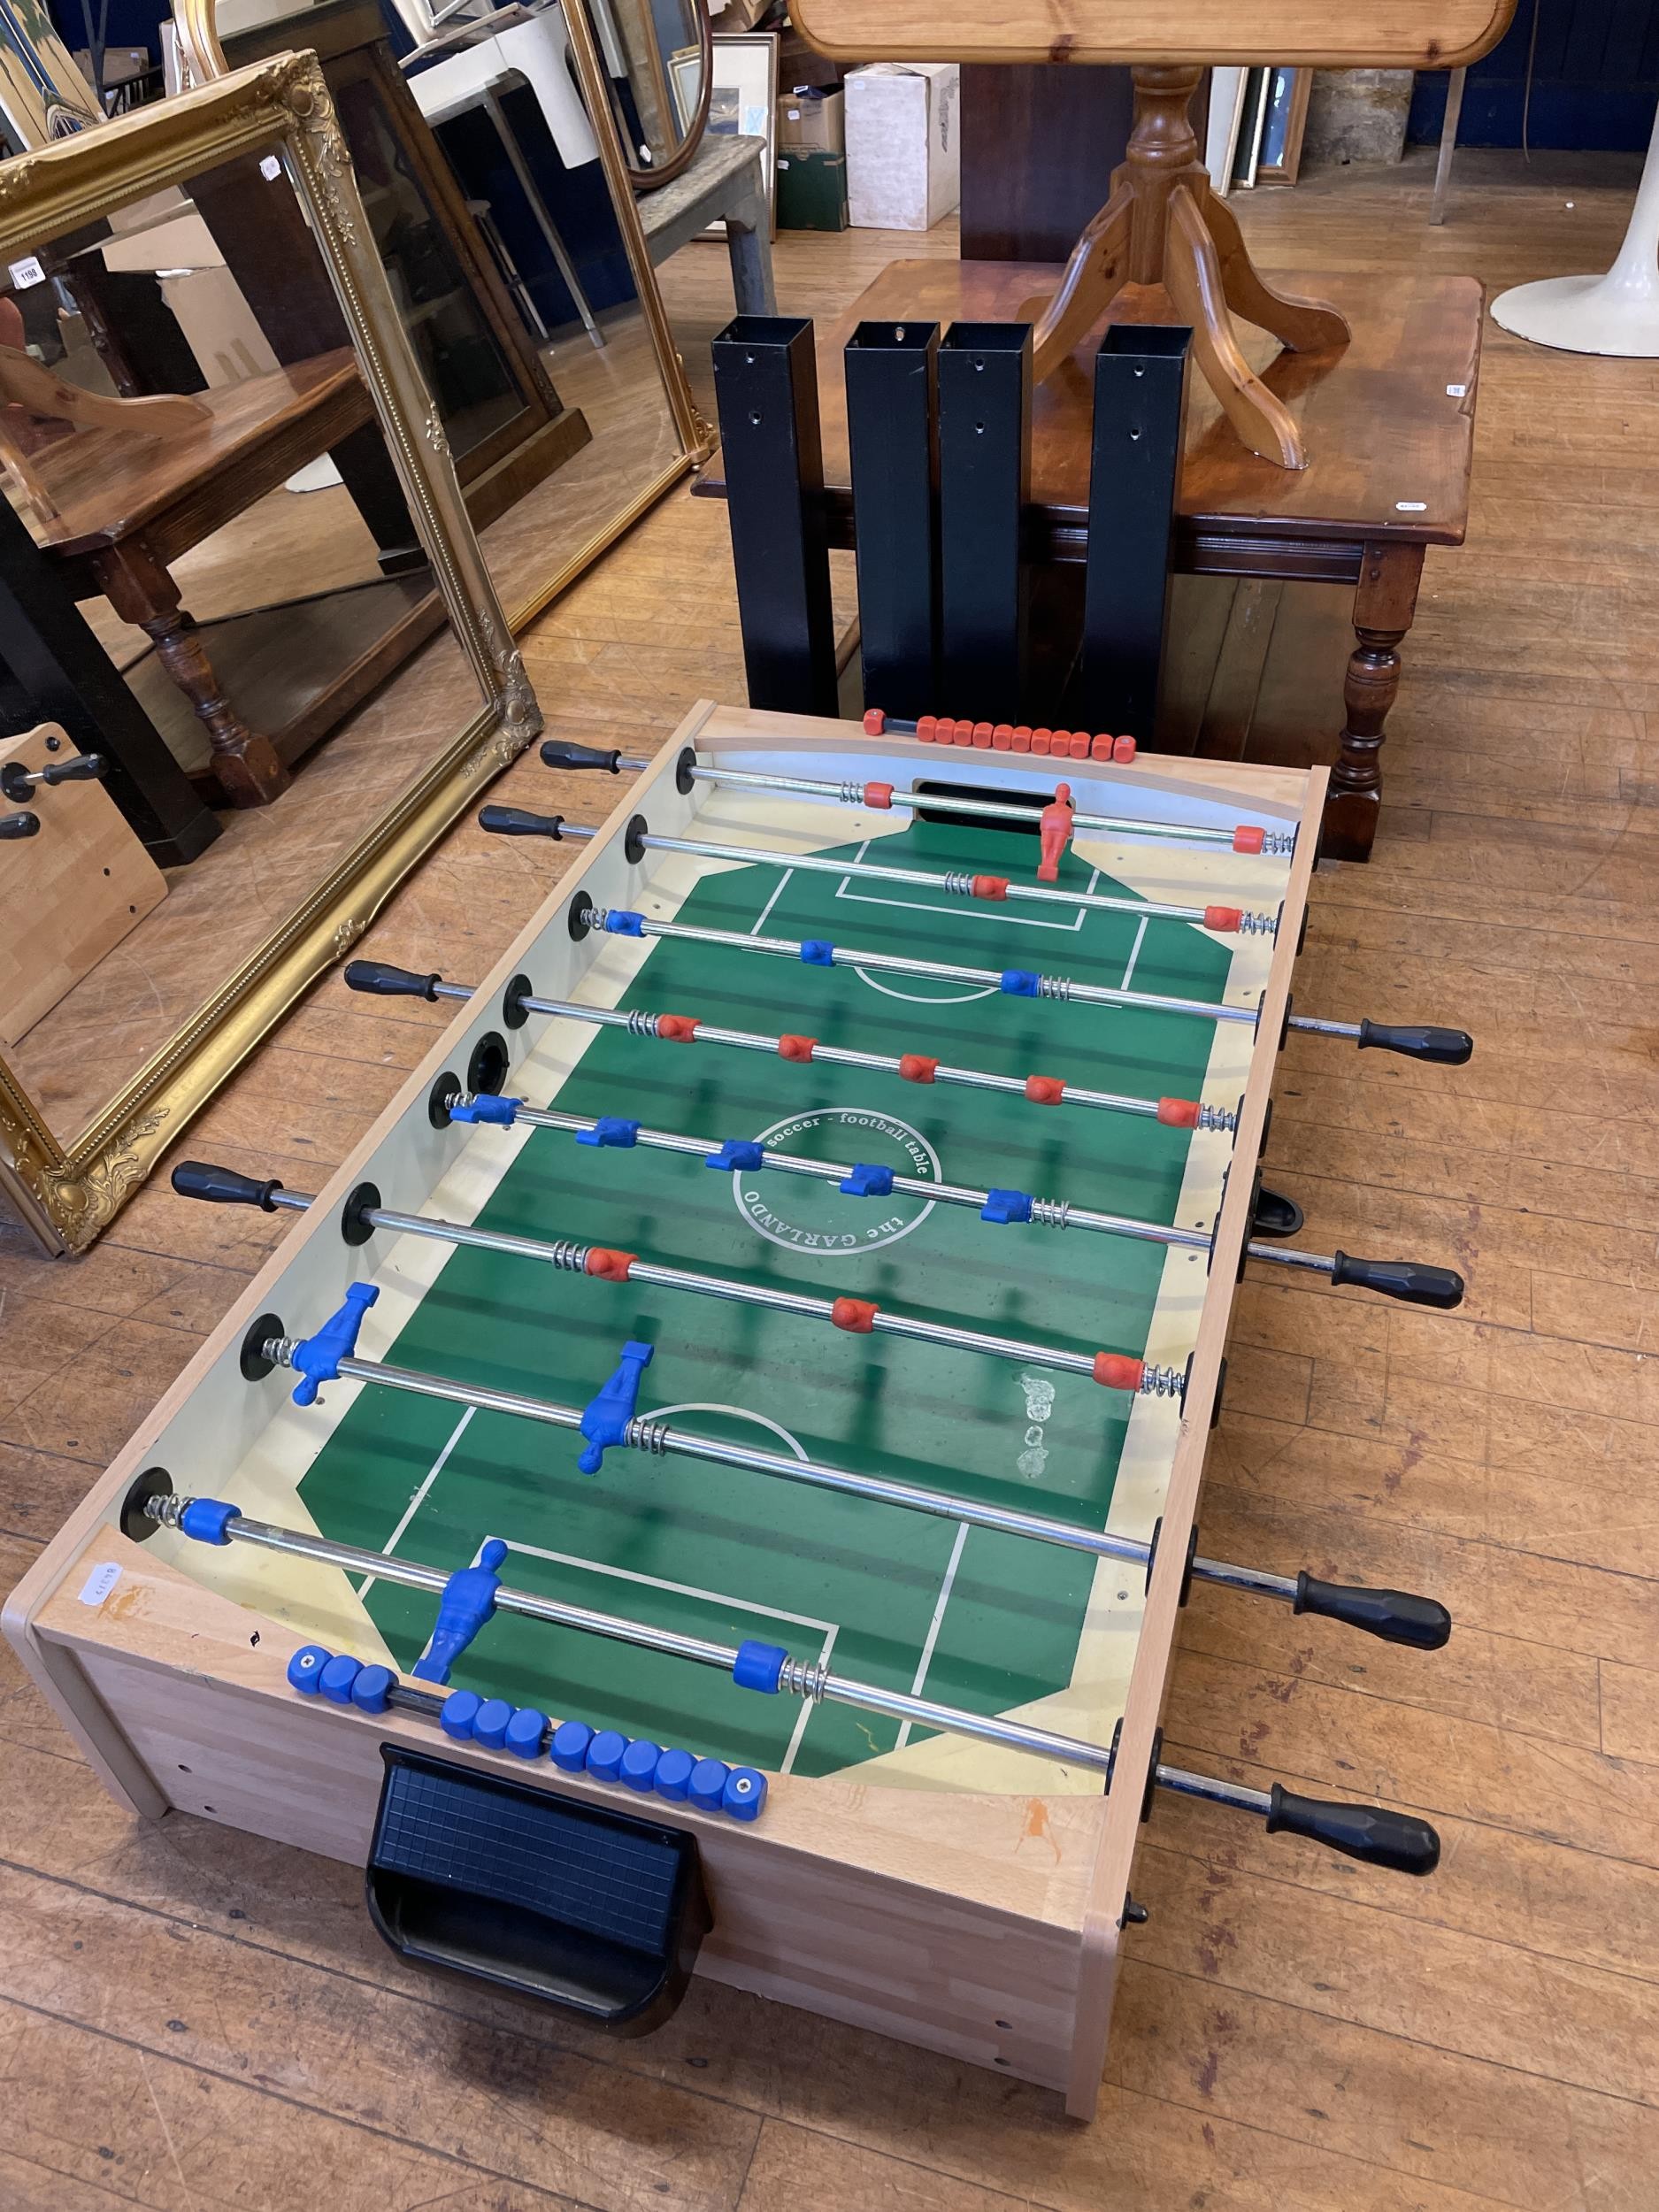 A Garlando Soccer Football table We do not have the bolts for the legs